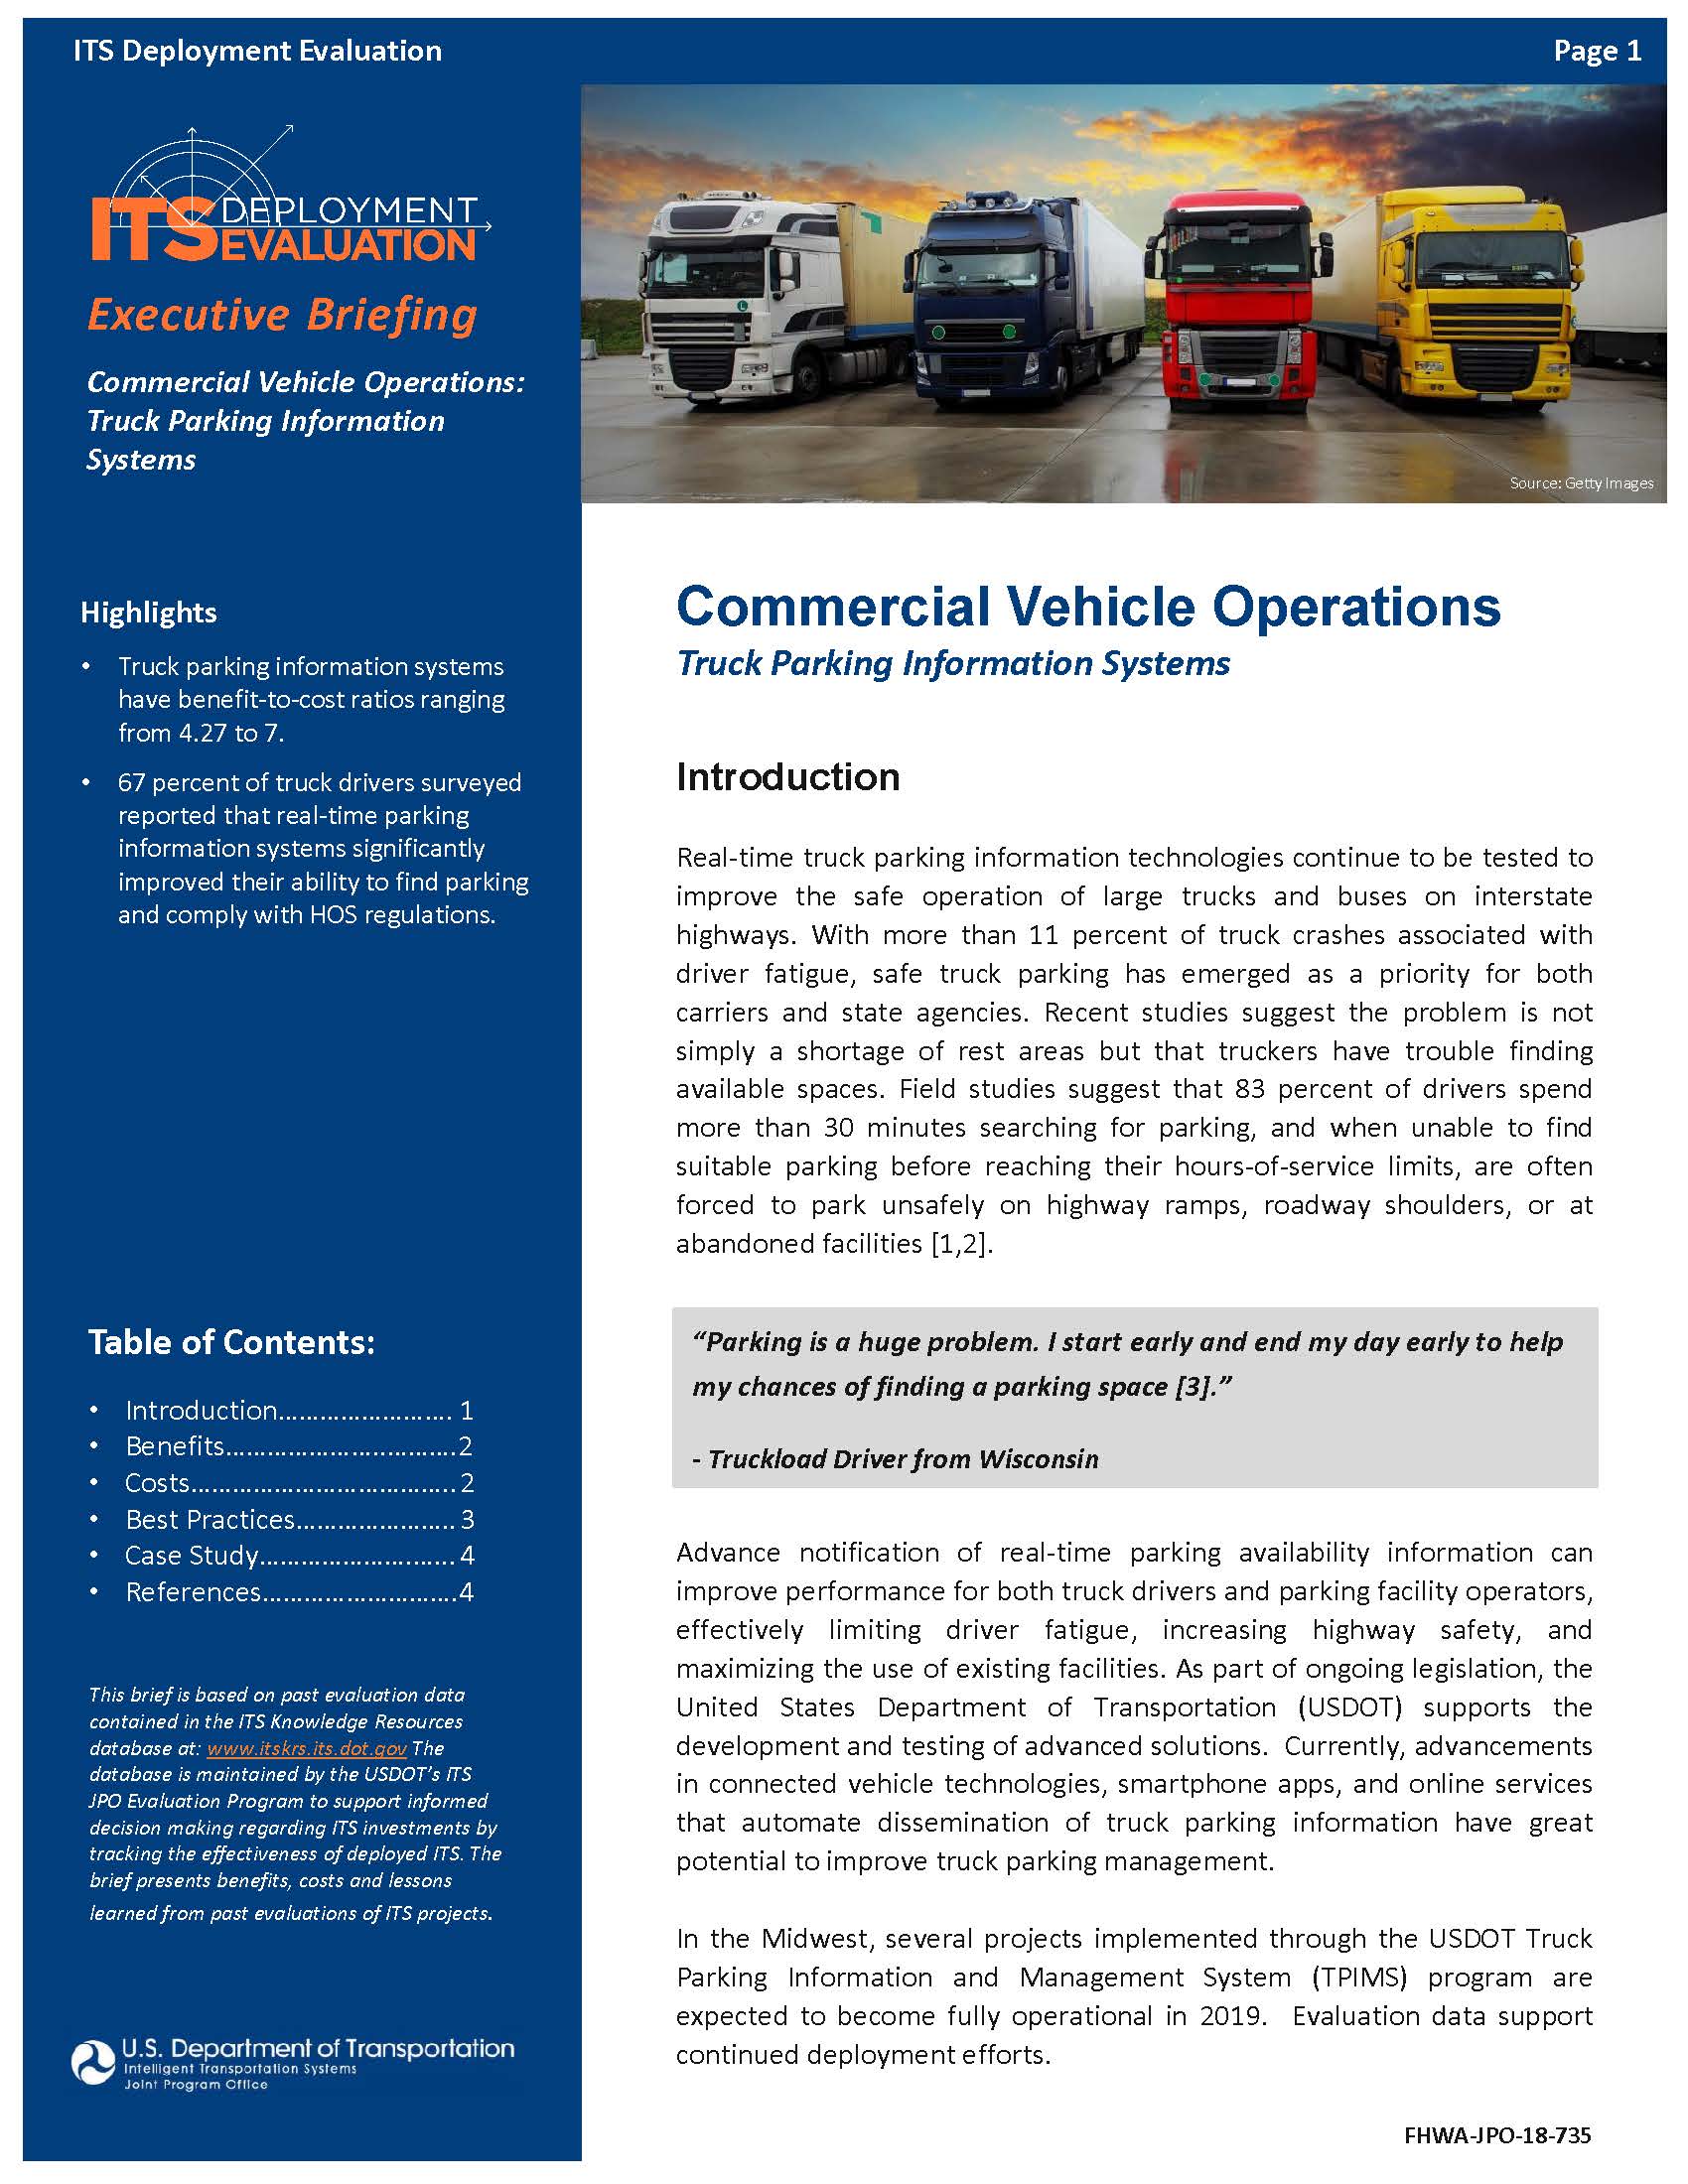 Cover Page of the Commercial Vehicle Operations: Truck Parking Information Systems 2019 Executive Briefing